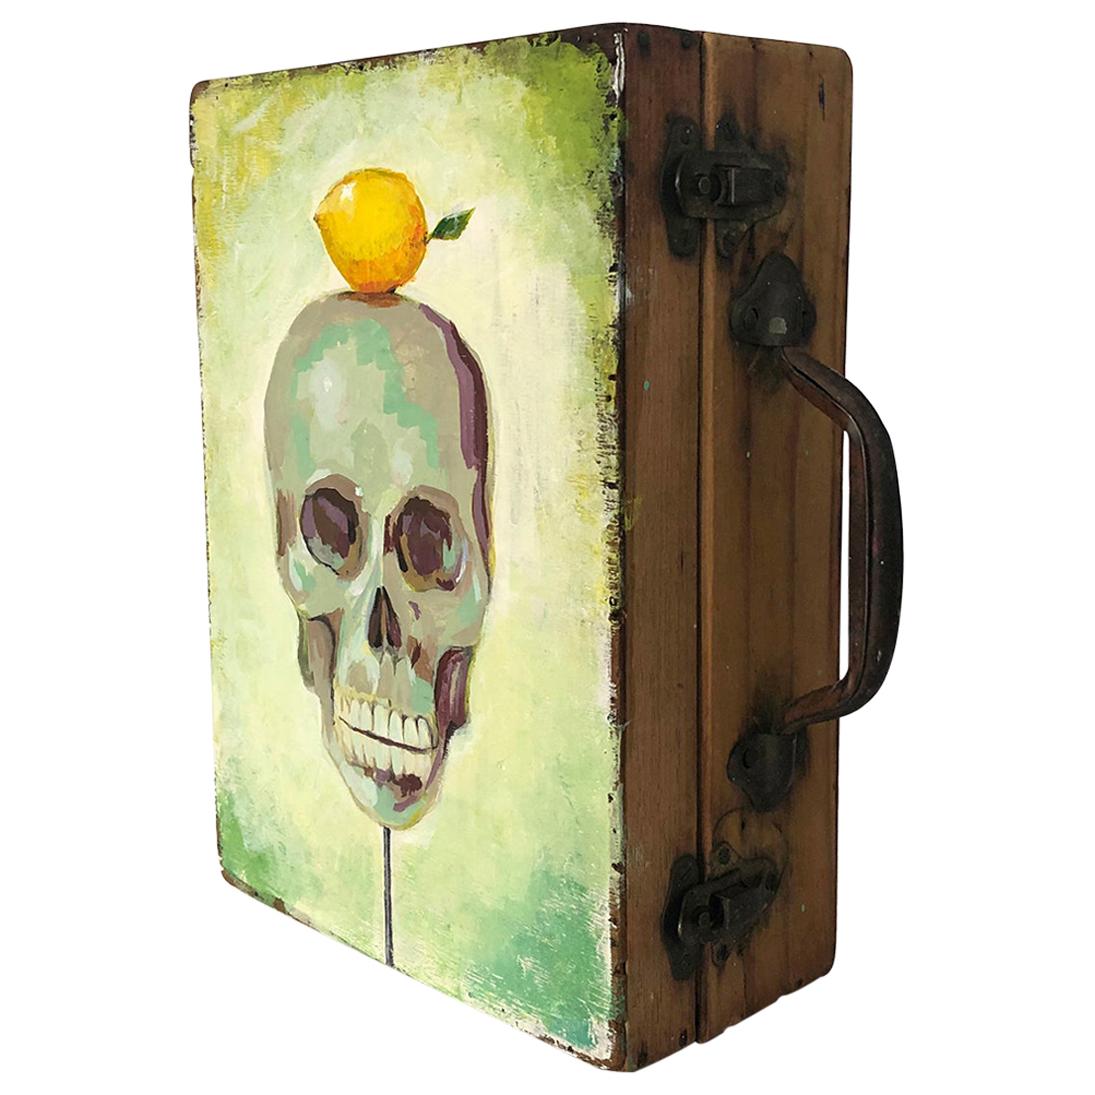 Antique Artist Box with Skull with Lemon Painting